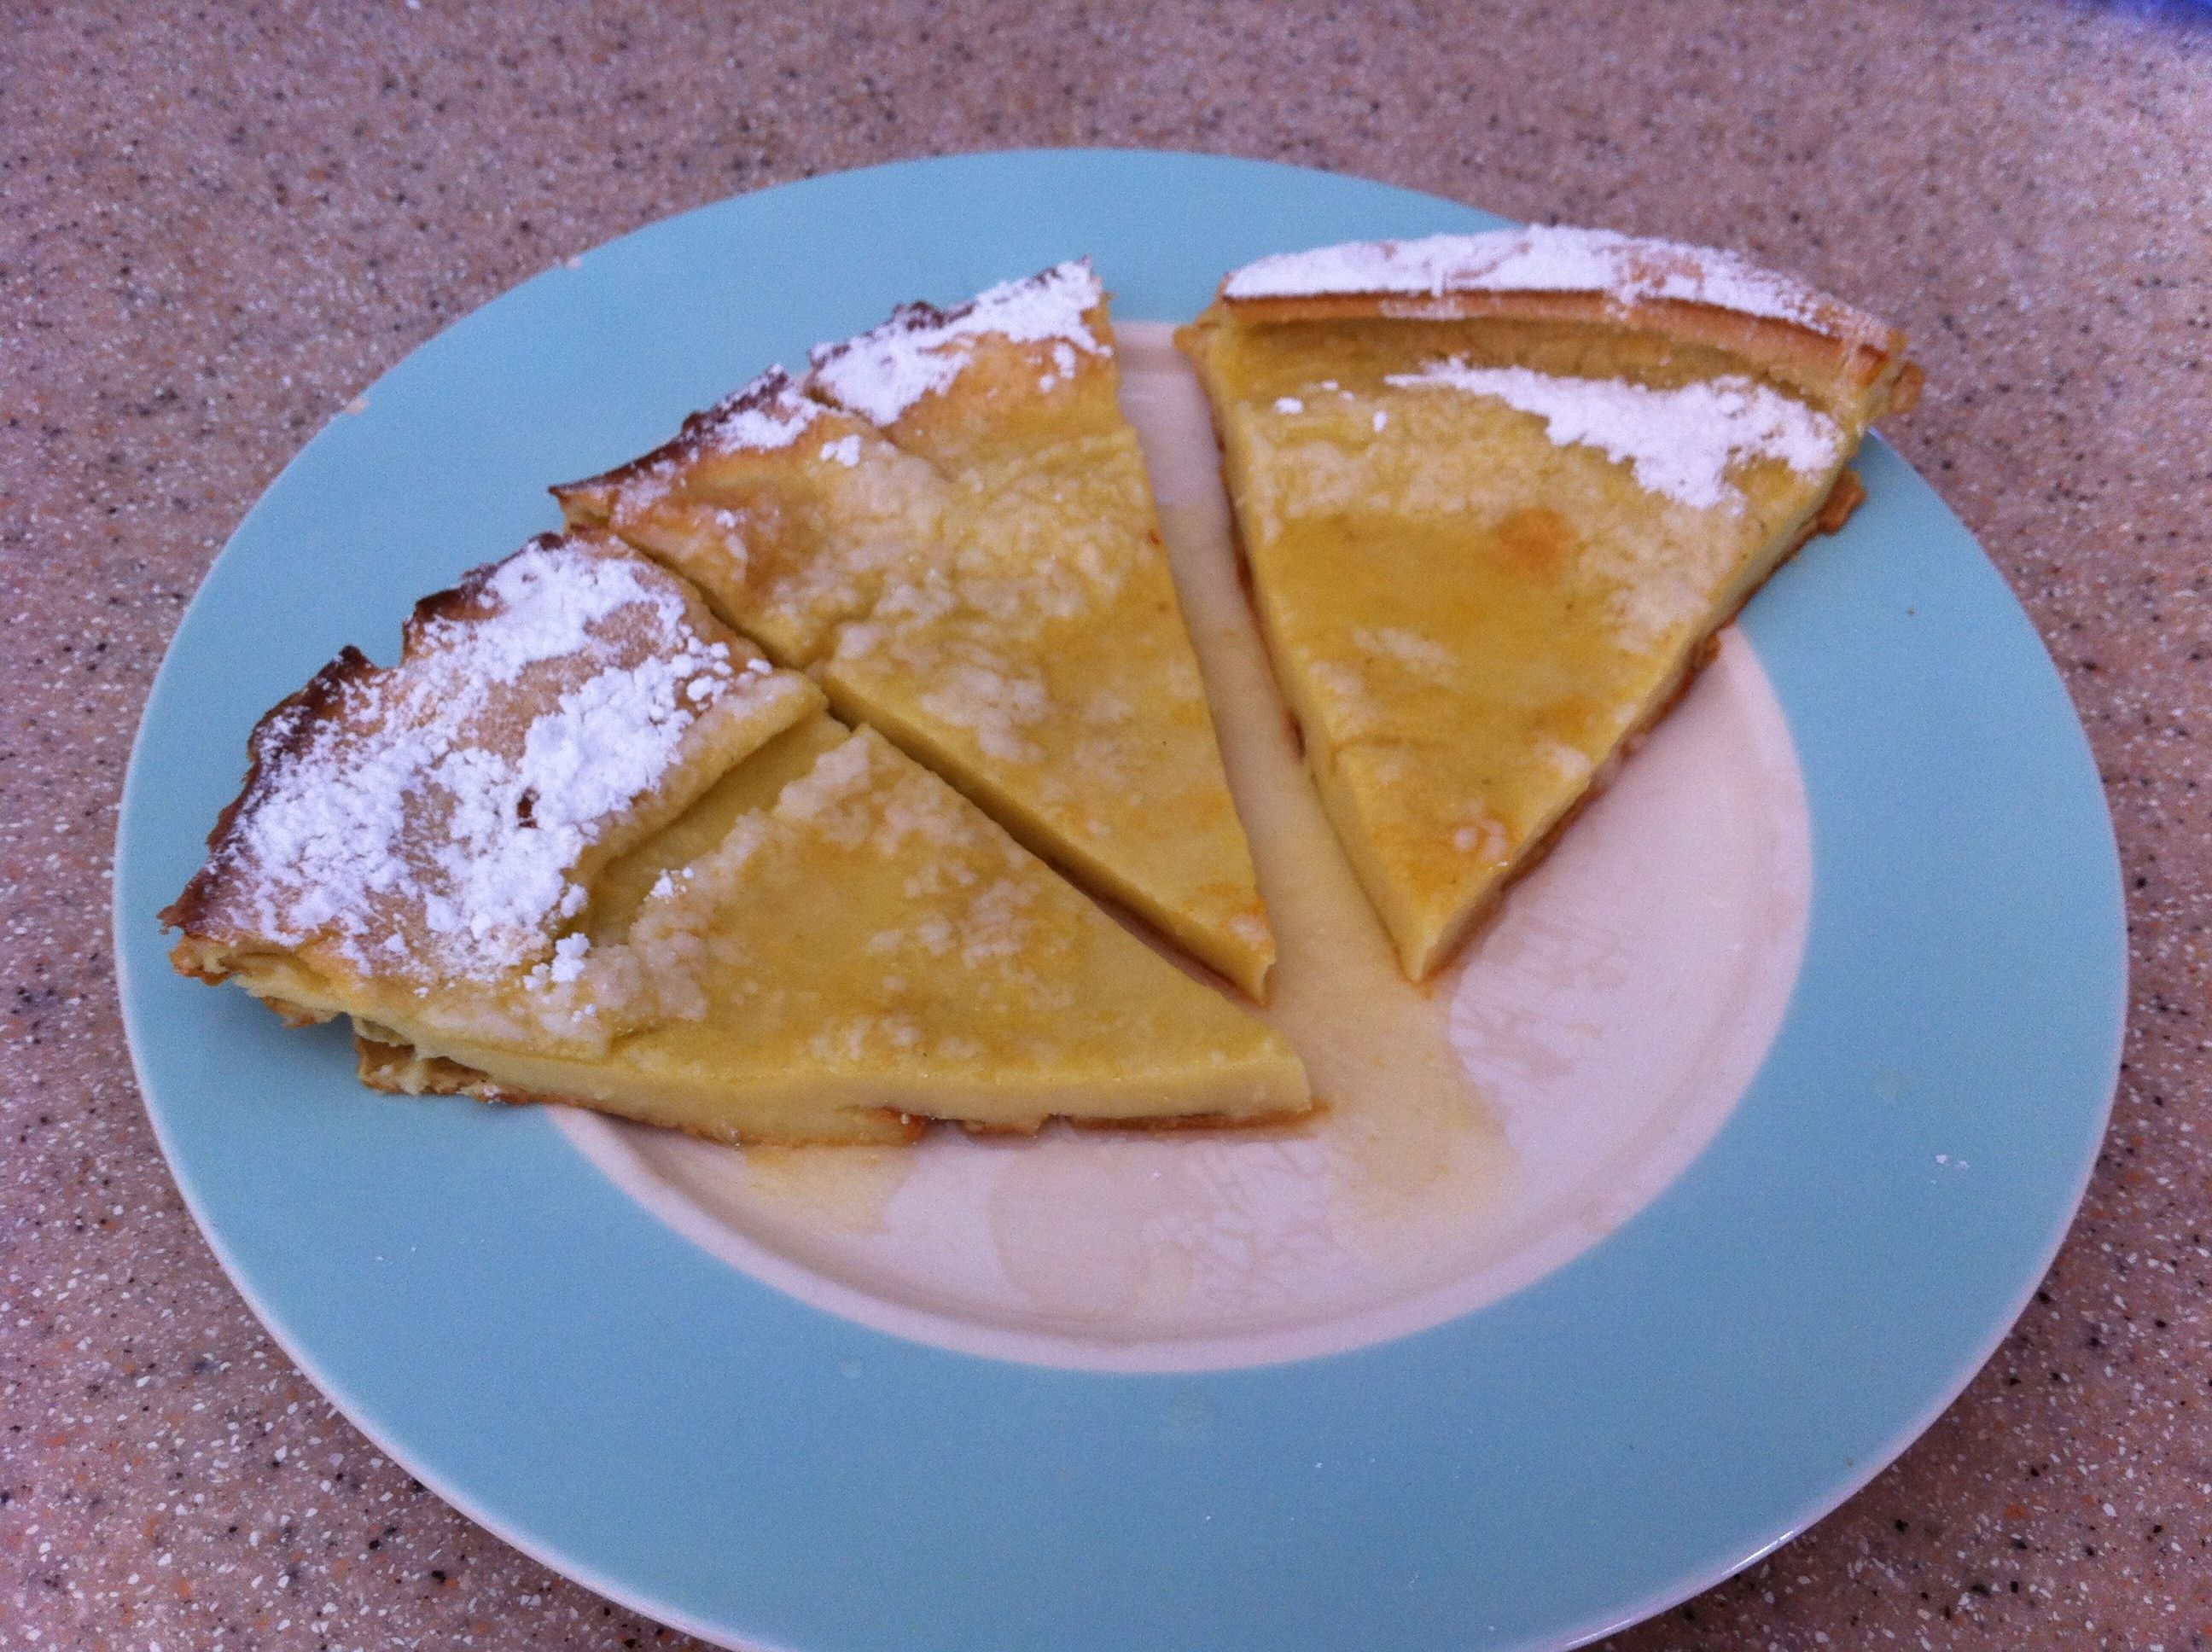 Image of 3 slices of German Pancake on a blue plate.